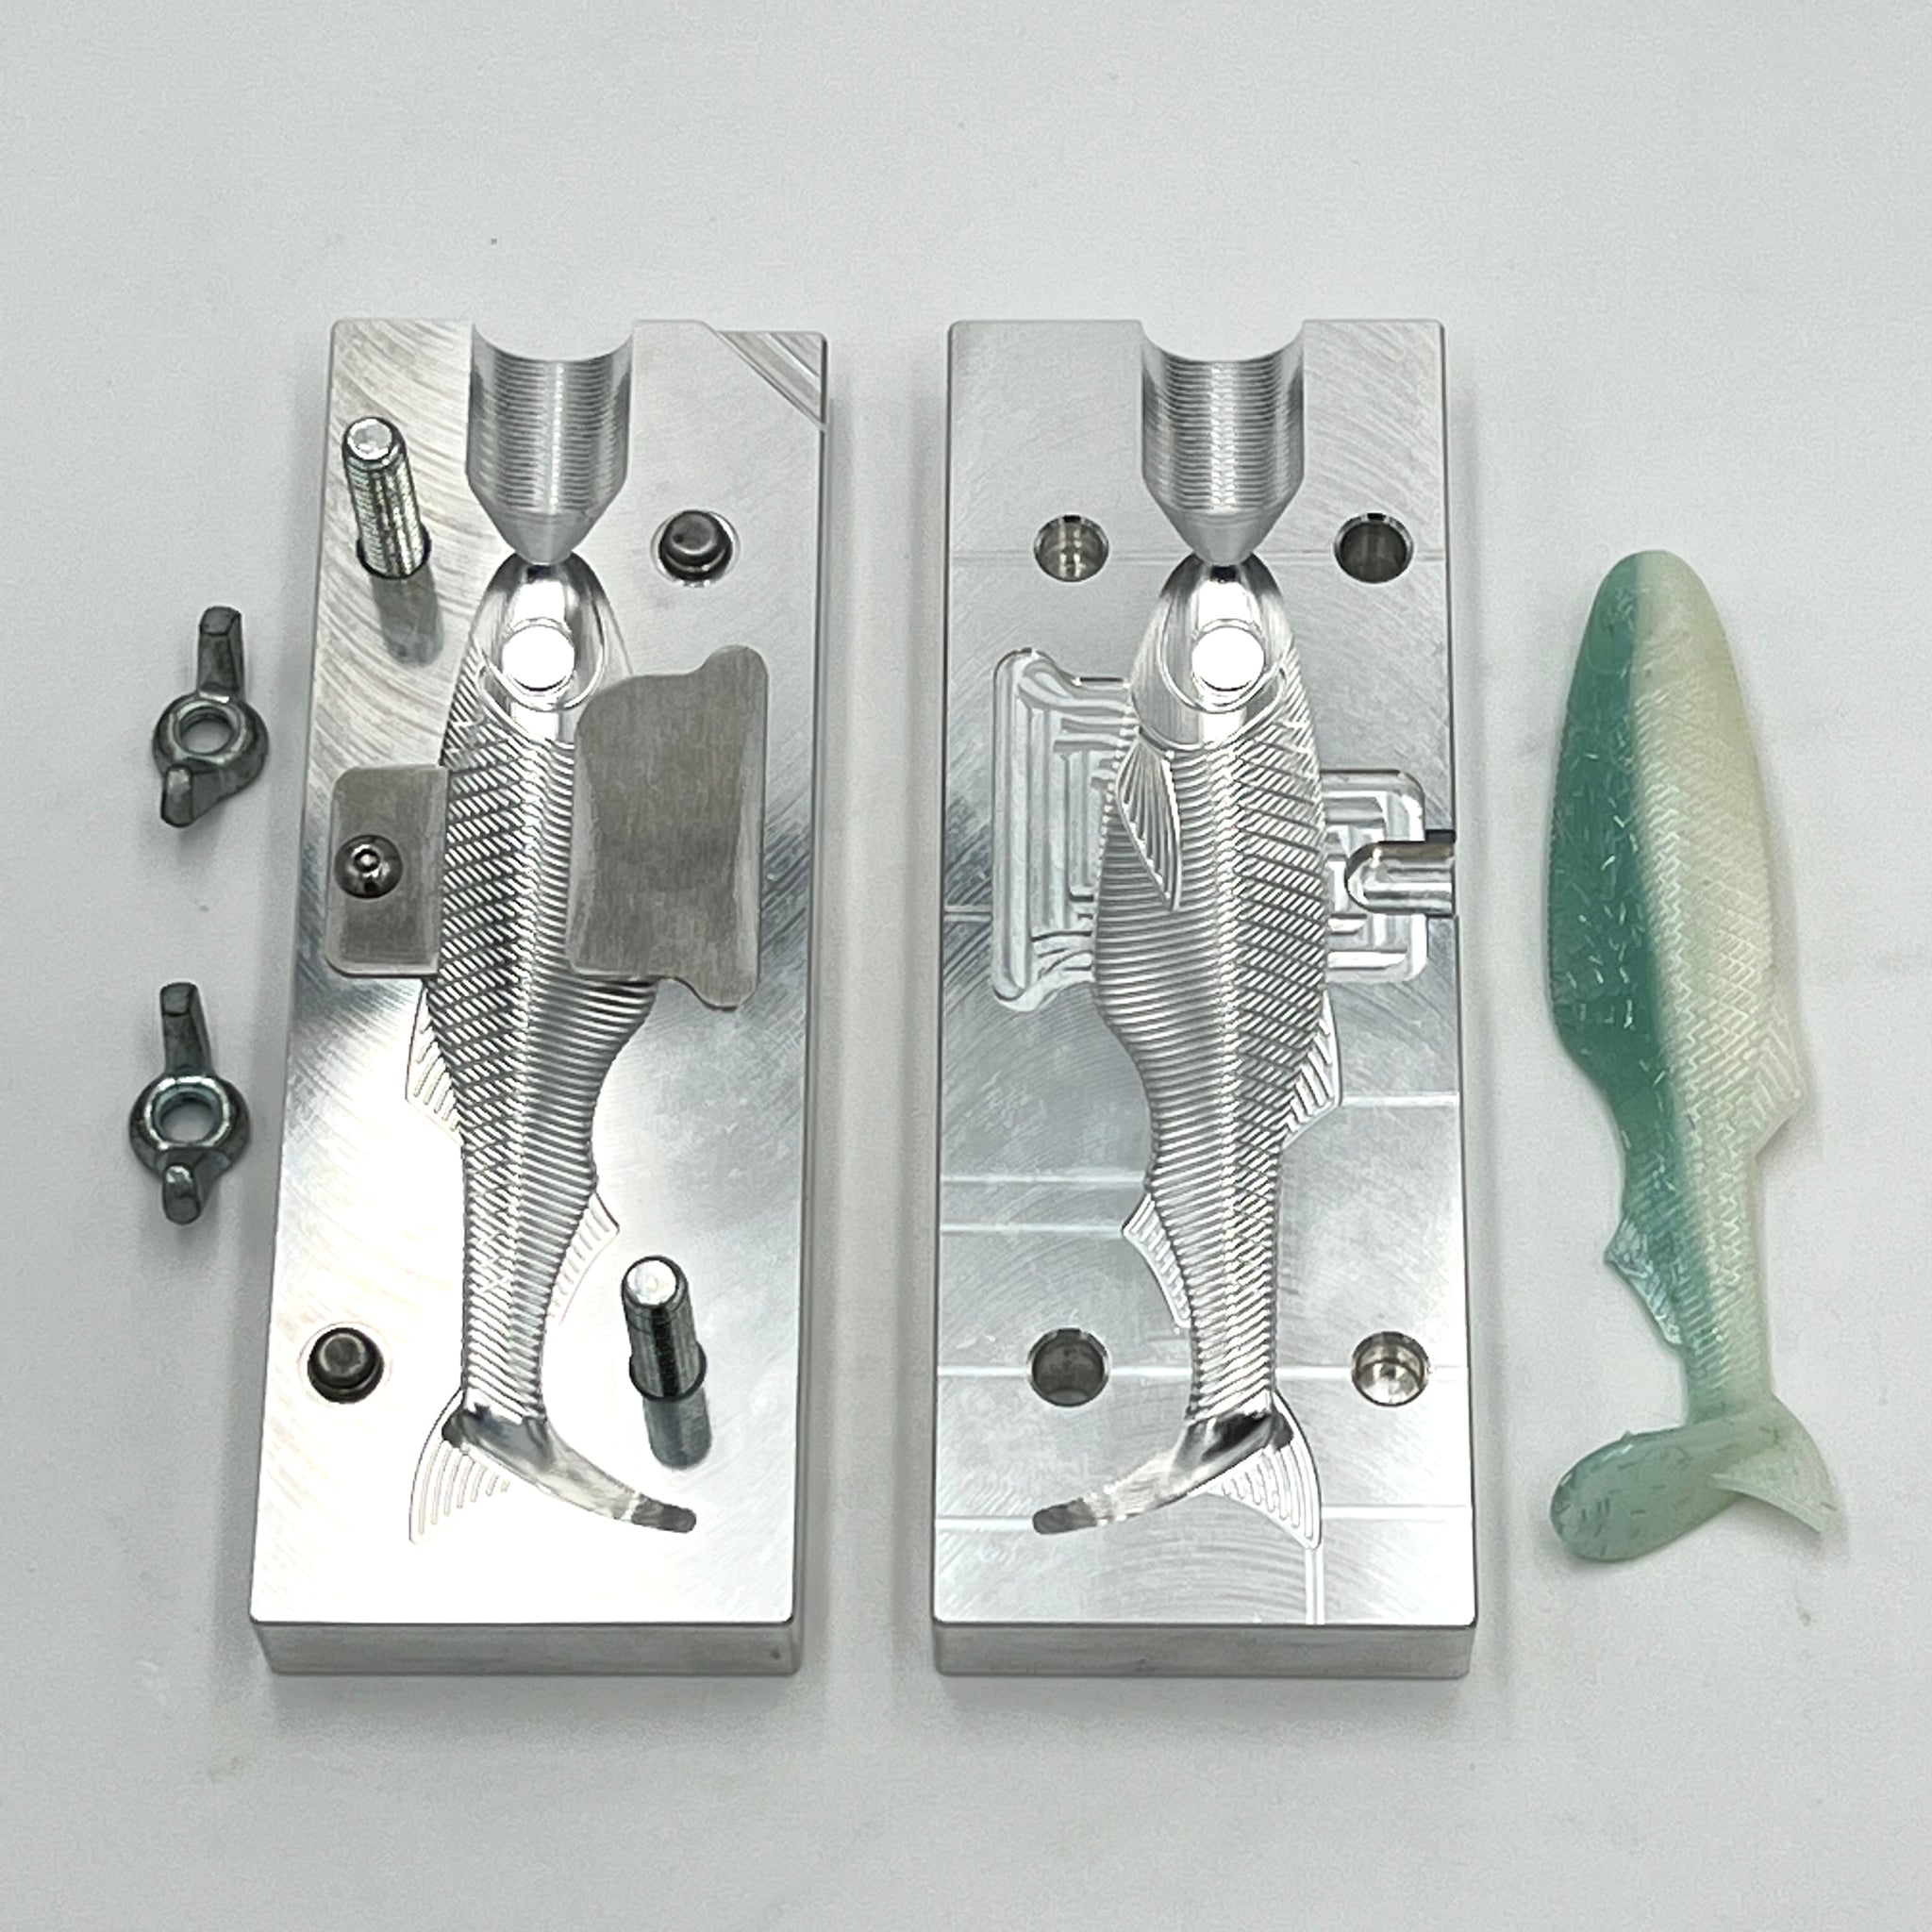 4.1 Inch Epic PreyBait Hand Injection Mold – Epic Bait Molds